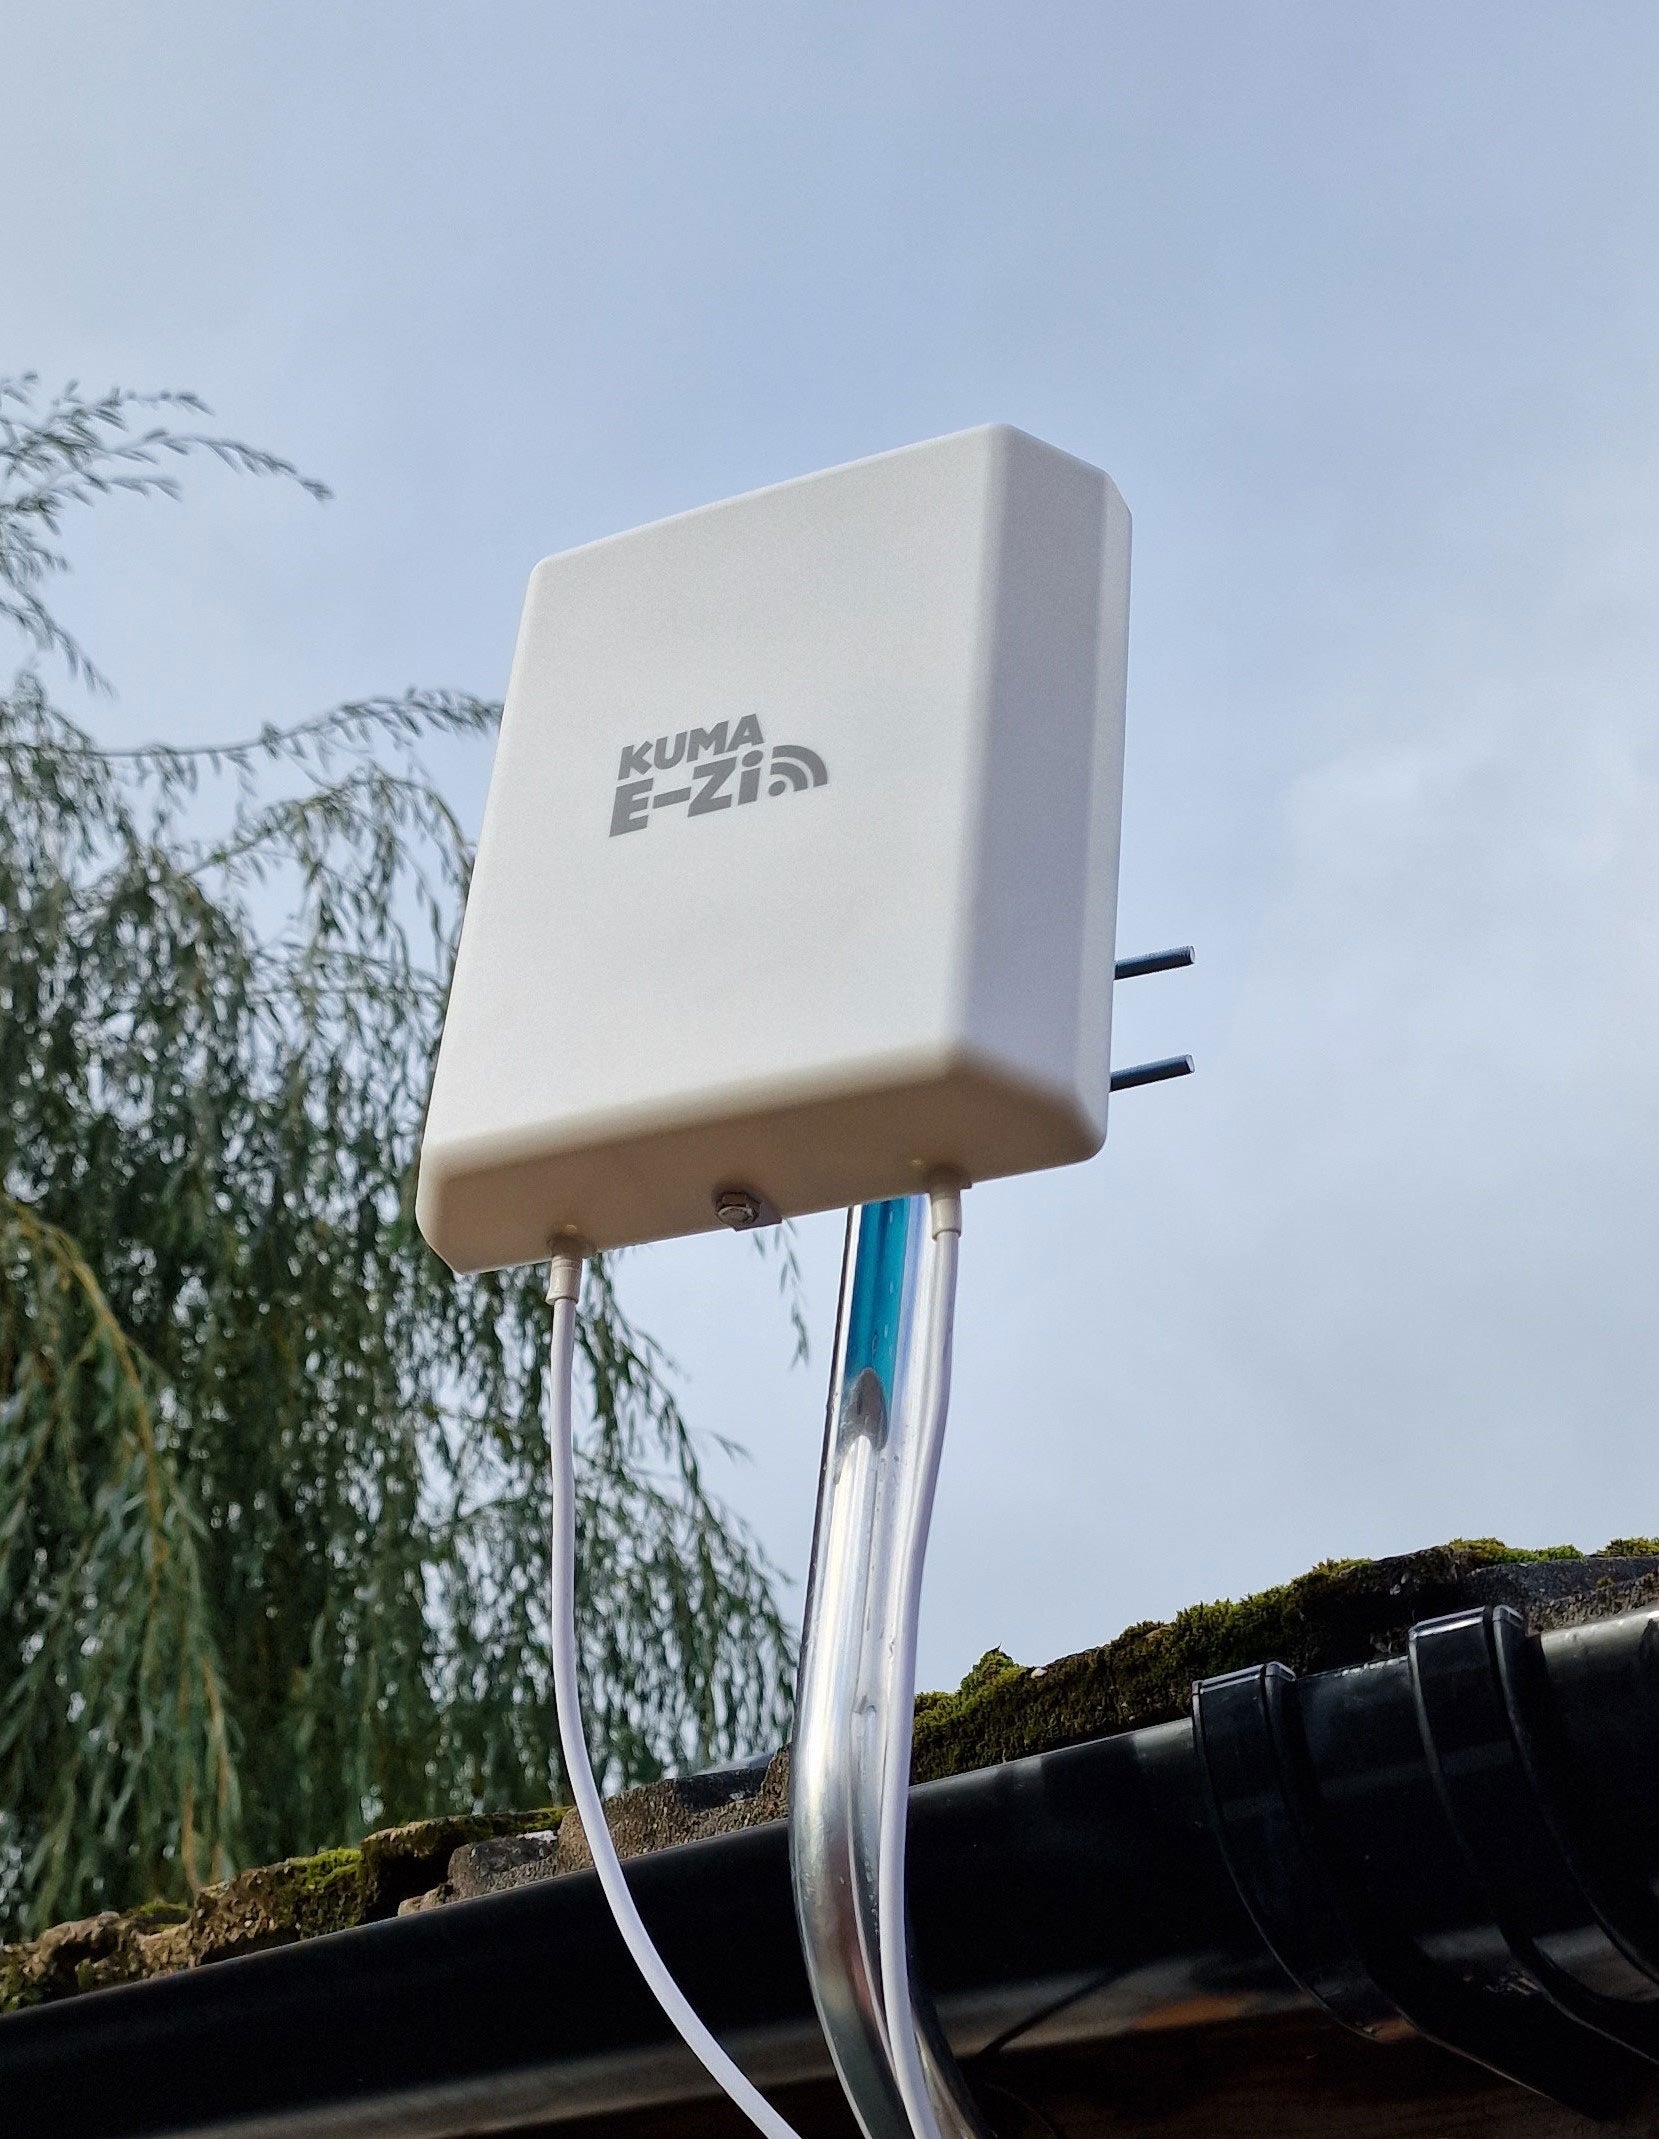 Connect E-Zi - 4G Router & Directional Antenna